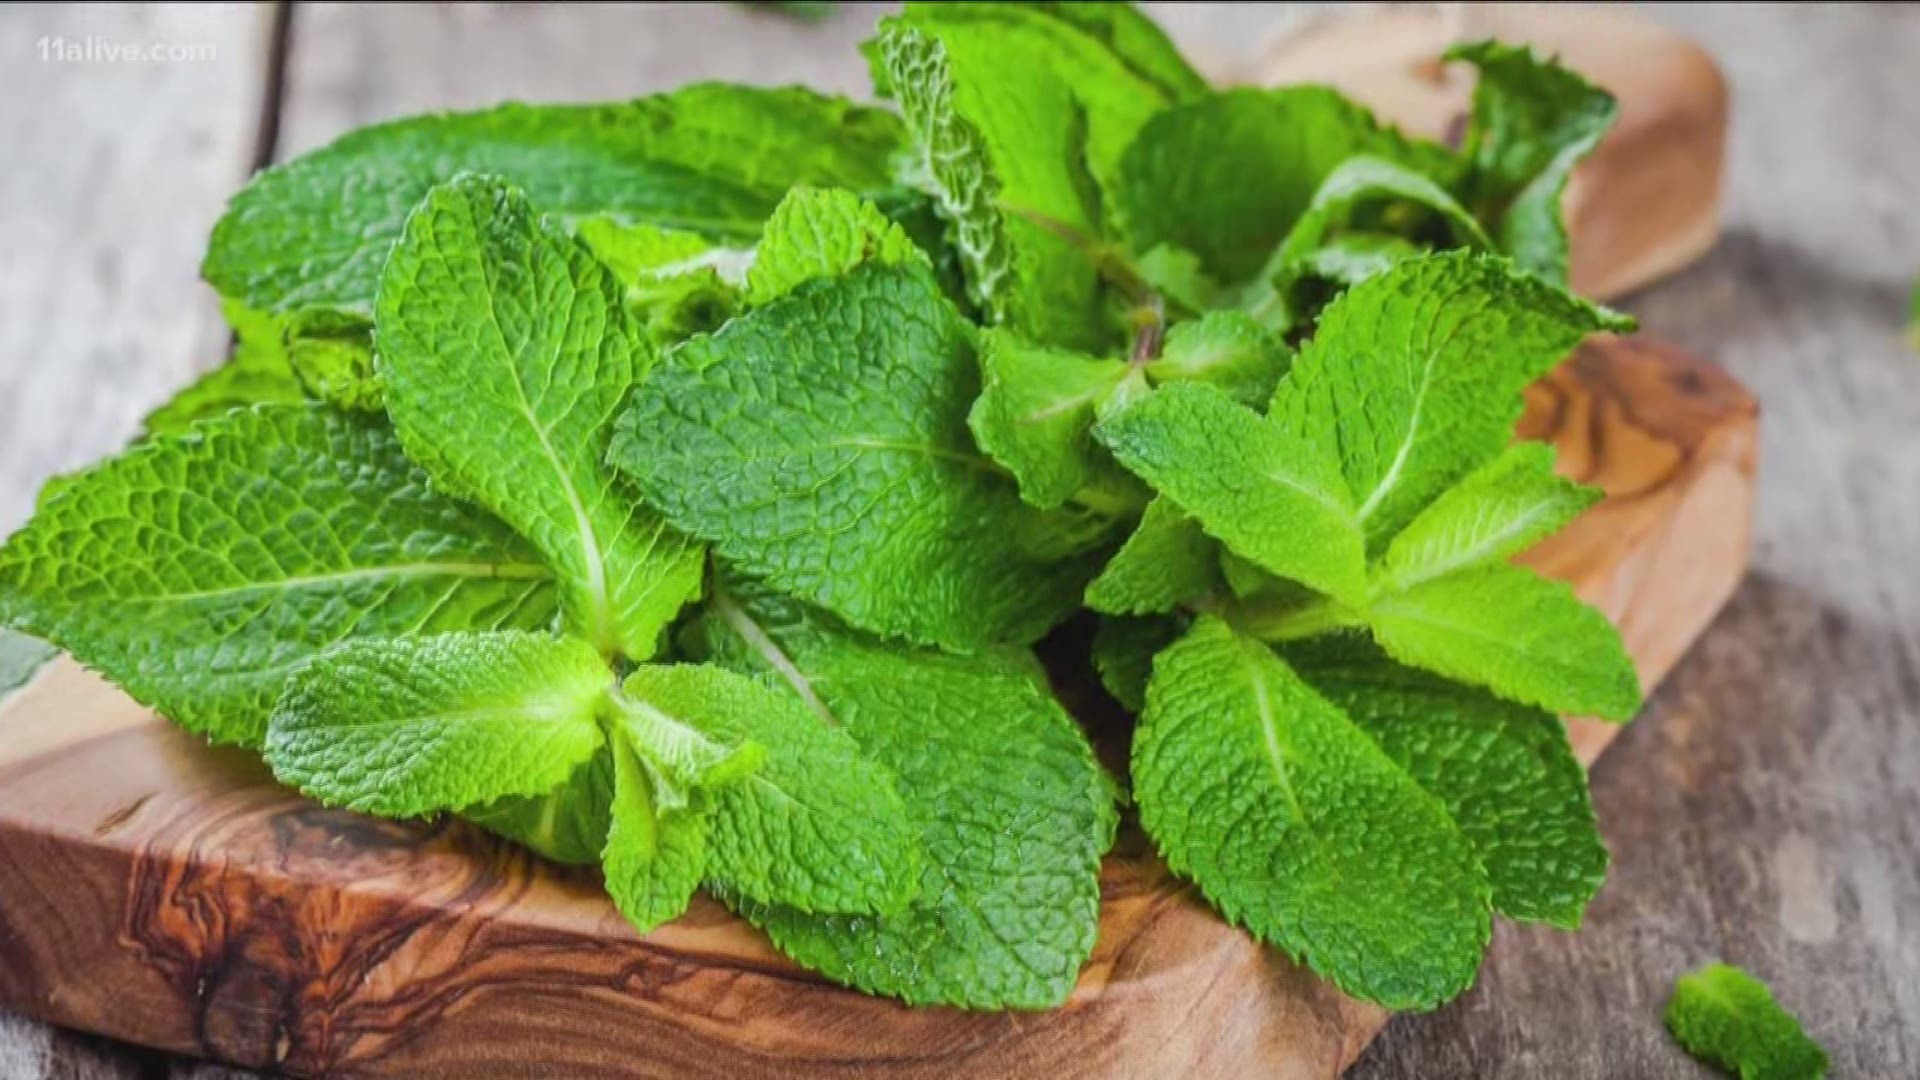 Your Thanksgiving meal is gone, and here's why mint might help with that lingering nausea.